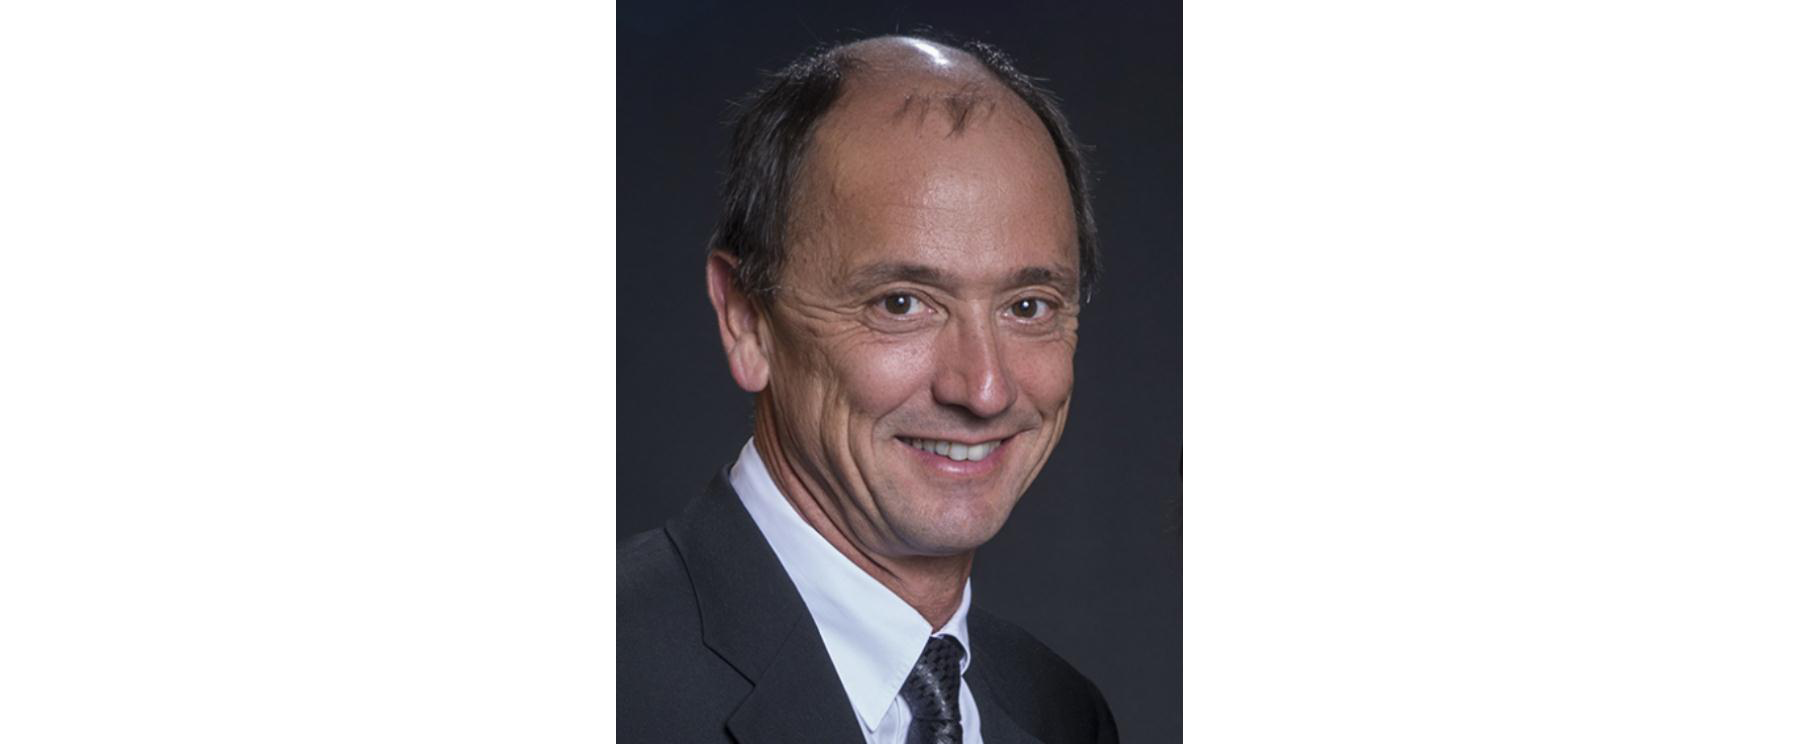 Volker Hartwein, FREQUENTIS Deutschland, elected as new Executive Board member for German Federal Professional Mobile Radio Association (PMeV)